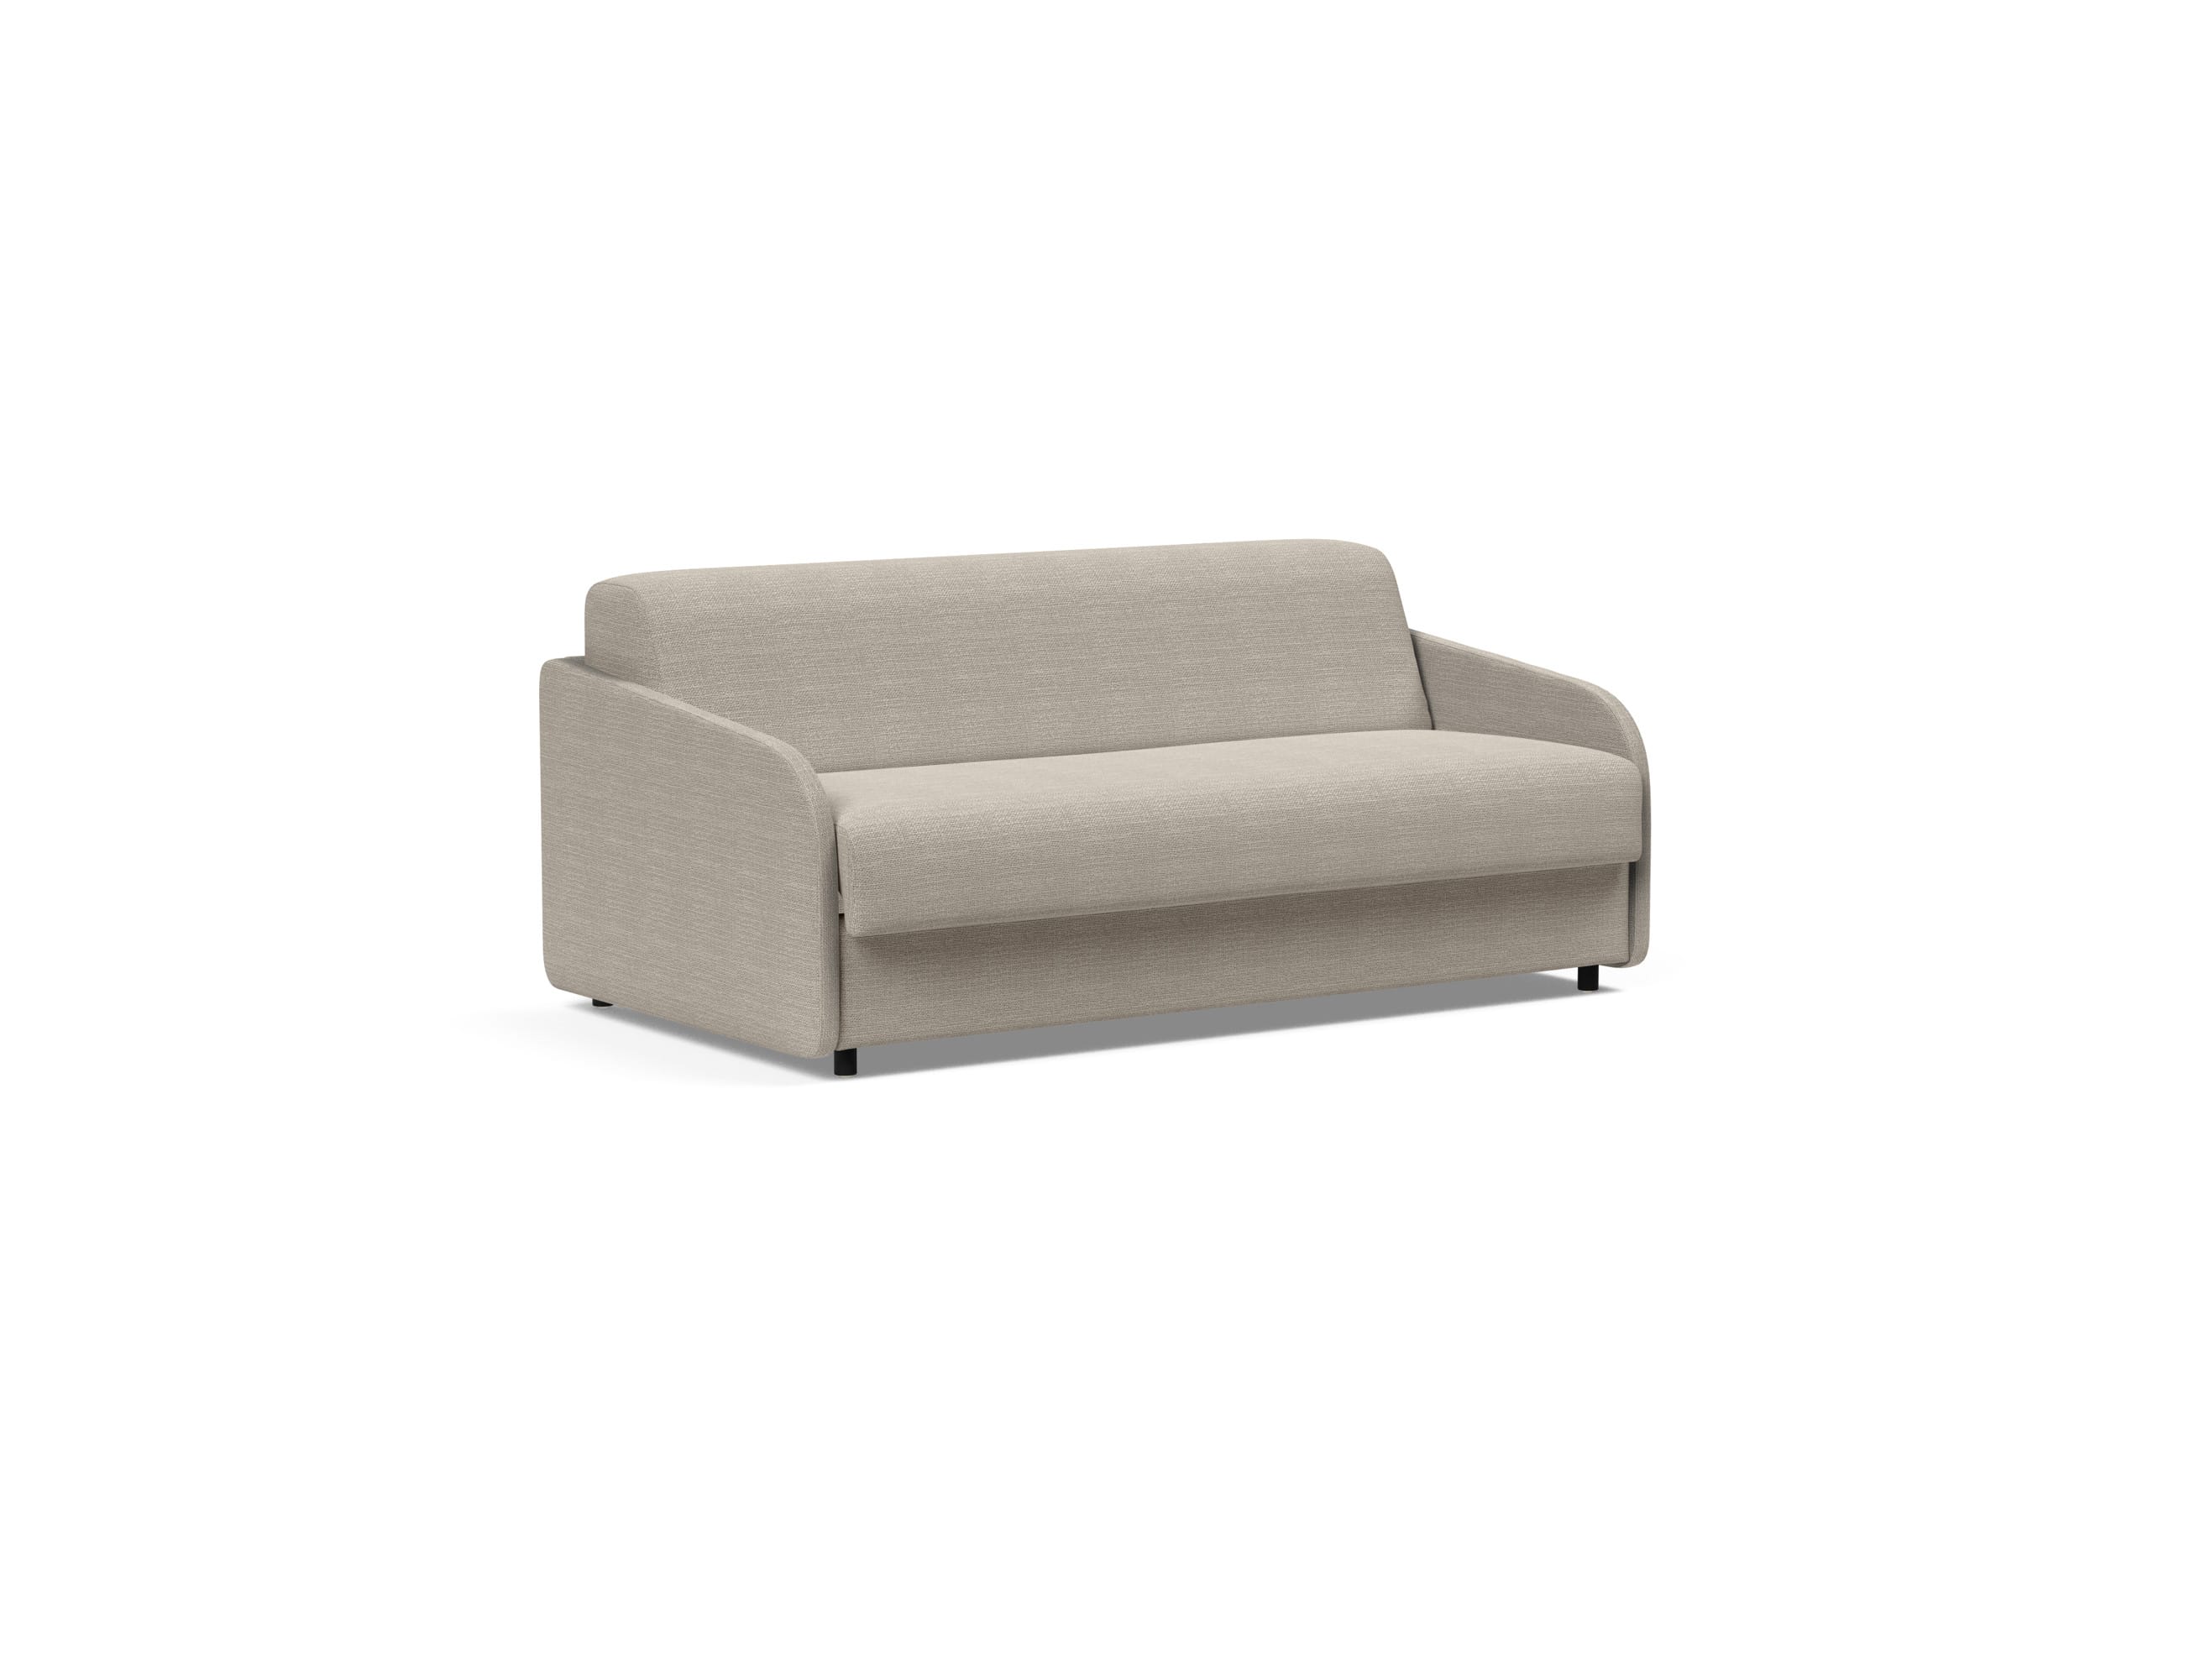 Eivor Dual Sofa Bed (Queen Size) Kenya Gravel by Innovation